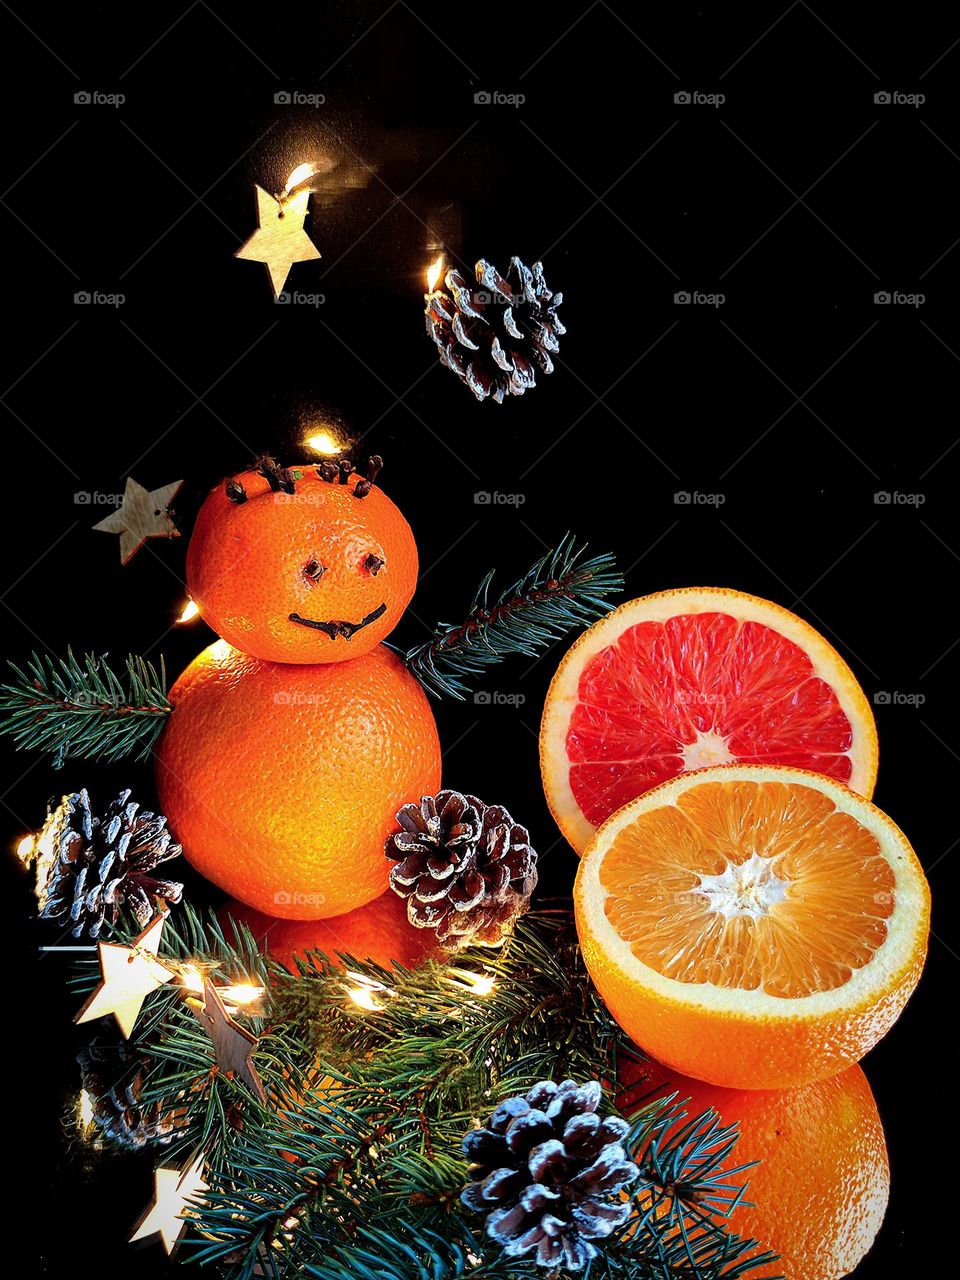 New Year card. Smiling mandarin and orange snowman on a black background and on a mirror. Spruce hands of a snowman are open to hugs. Nearby lie halves of oranges and a spruce branch. Around a luminous garland of cones.